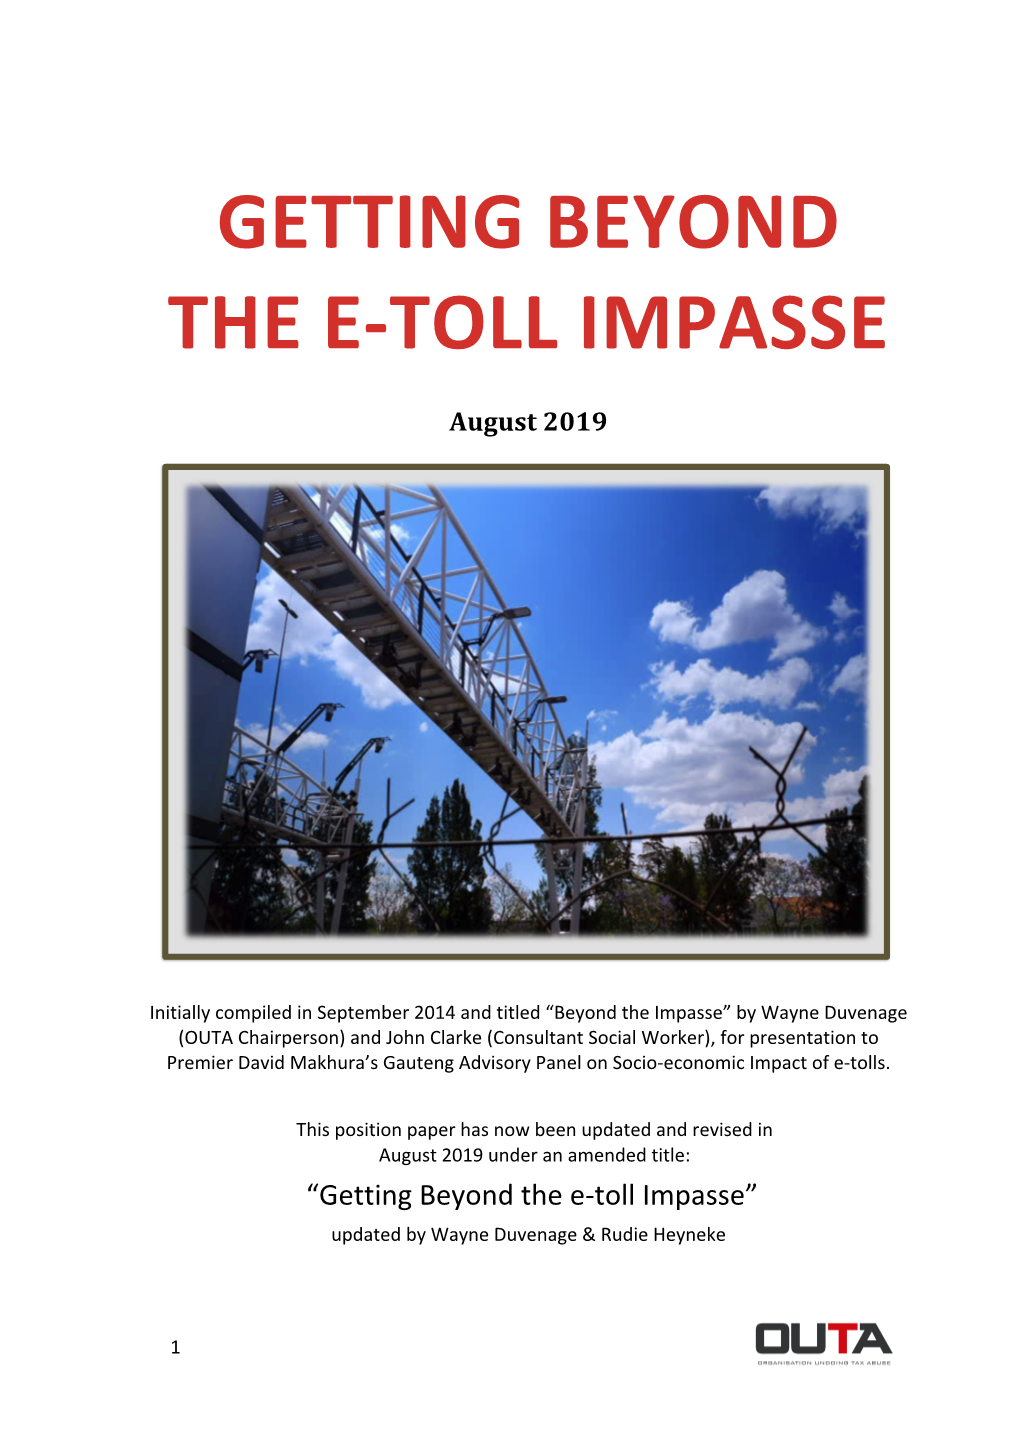 Getting Beyond the E-Toll Impasse